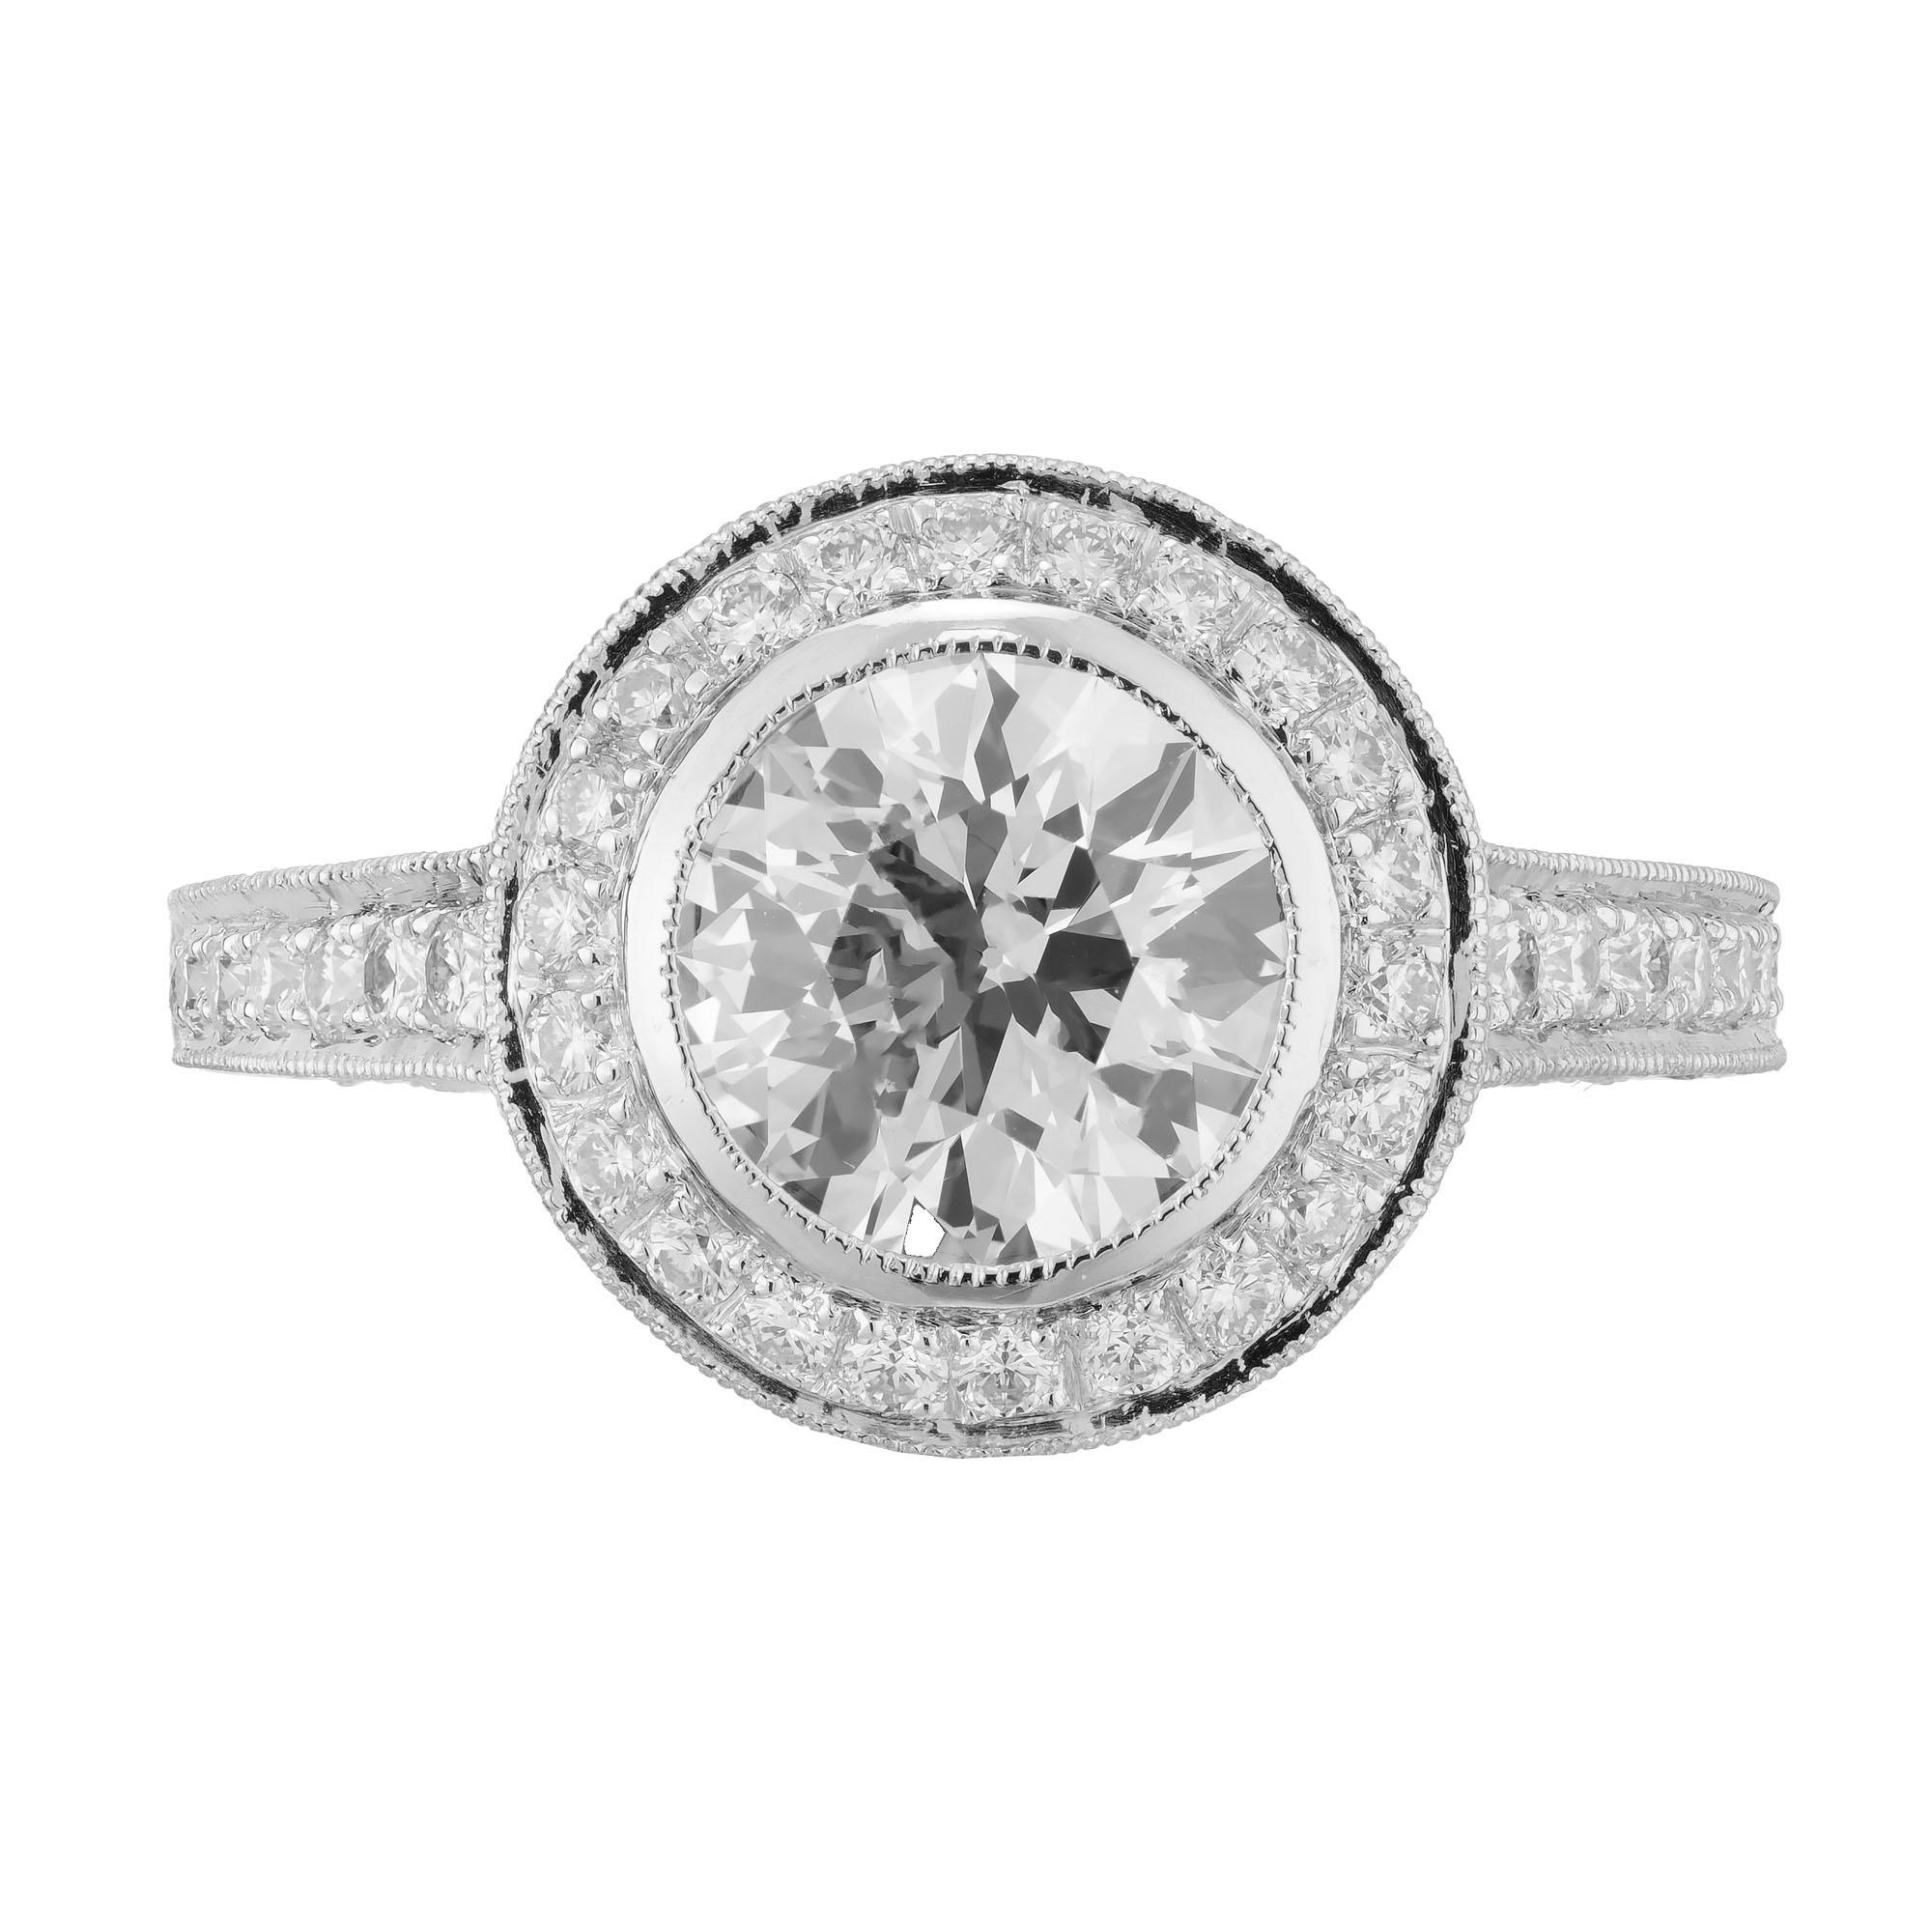 European transitional Ideal cut diamond engagement ring. GIA certified 1.61cts round center stone in a platinum halo setting with 114 round micro pave set accent diamonds. Raised crown and small table. Created in the Peter Suchy Workshop. 

1 round